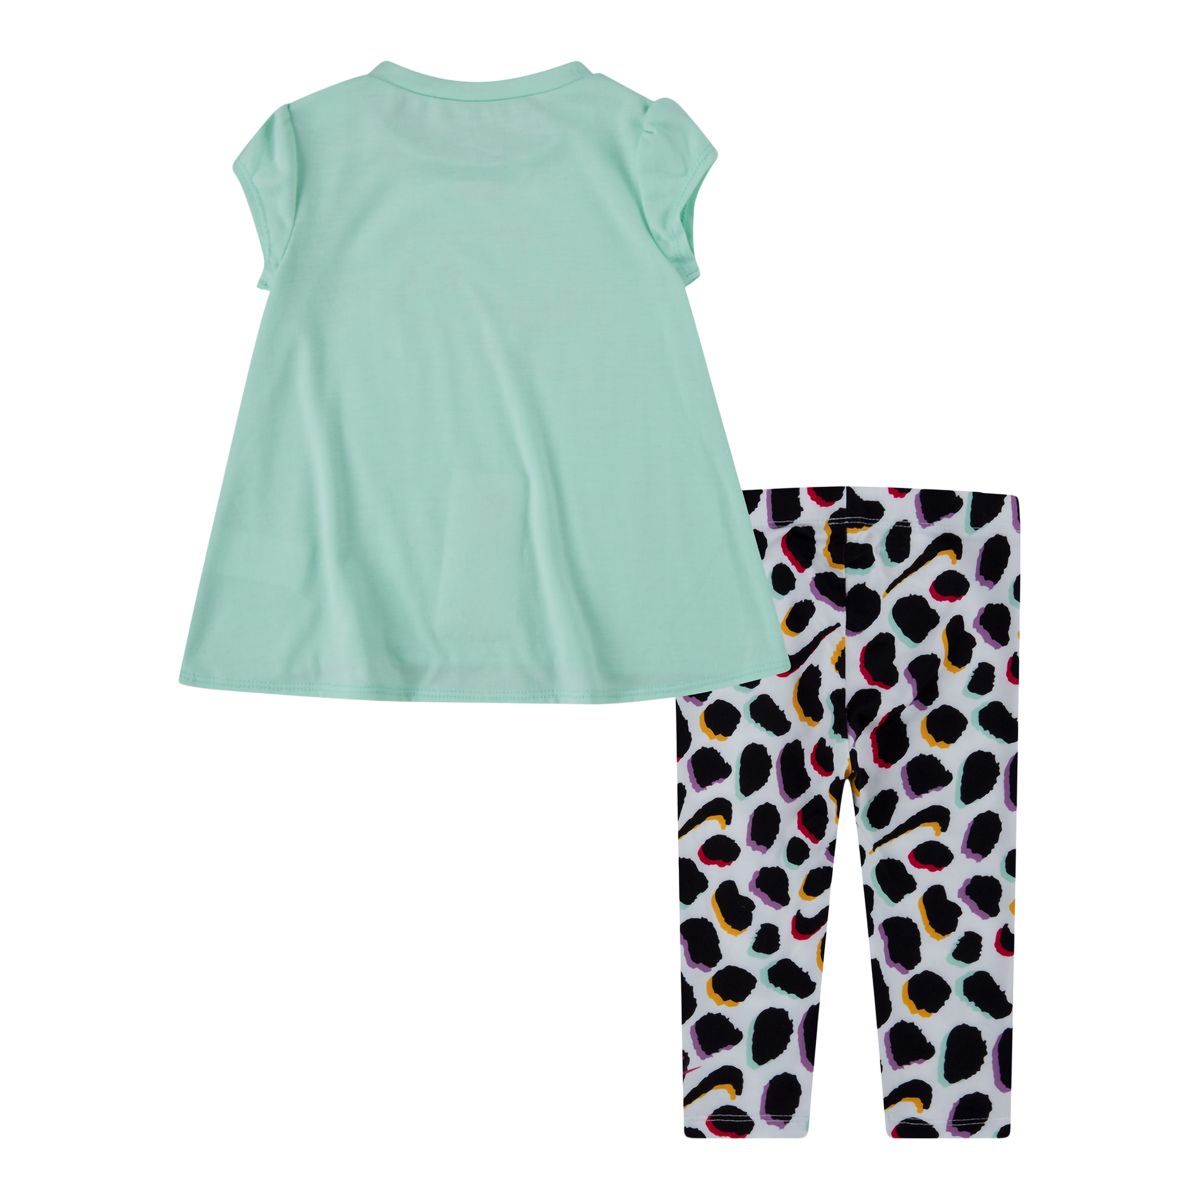 Nike Toddler Girls' 4-6X Tunic and All Over Print Legging Set